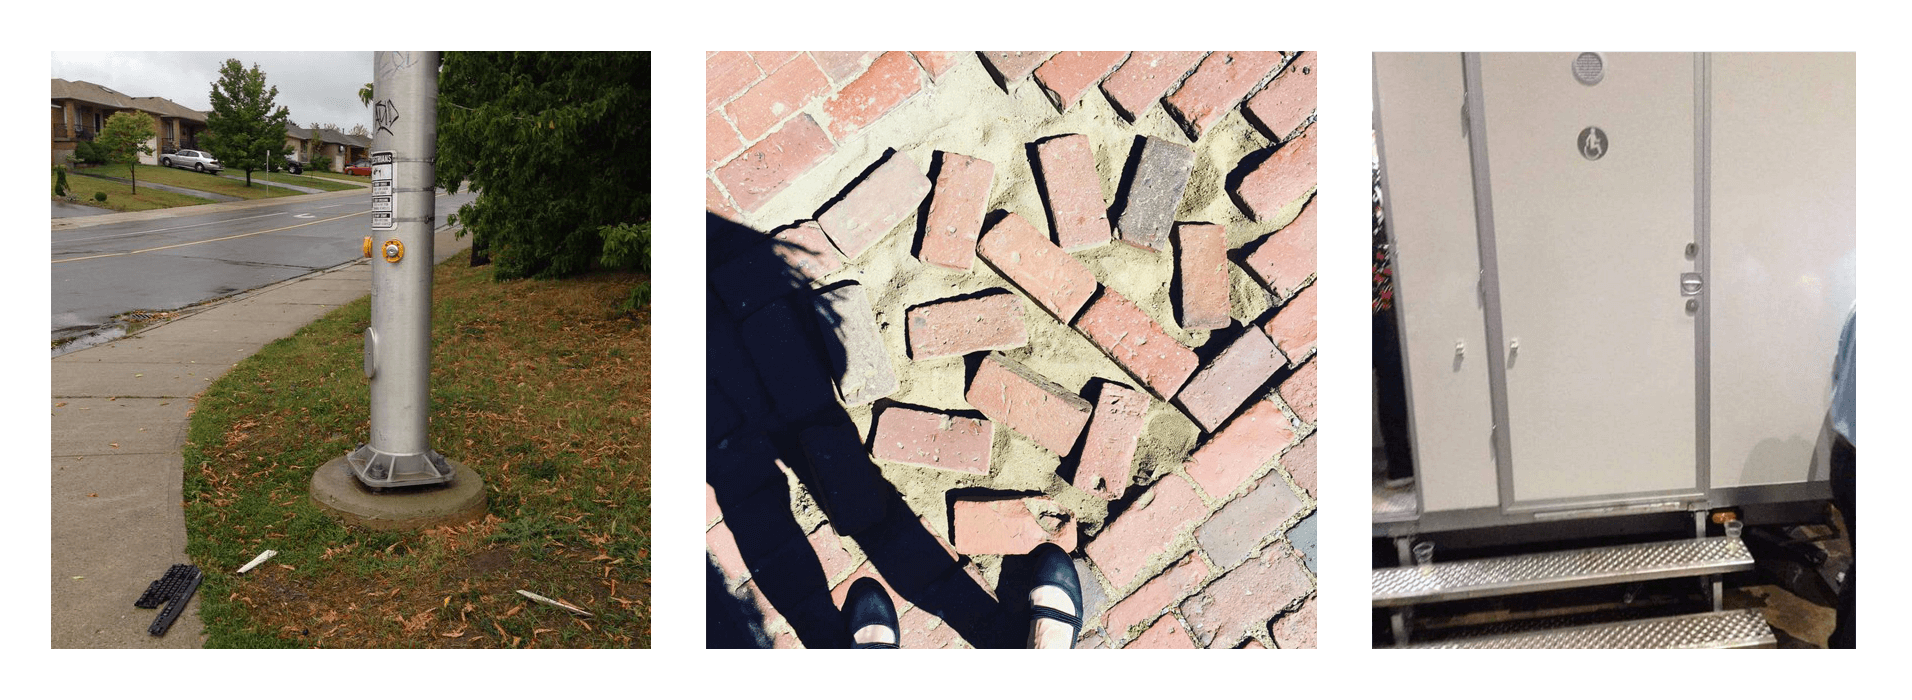 Three photos of accessibility problems - a walk sign button too far from the sidewalk, a broken sidewalk, and a set of stairs to a bathroom